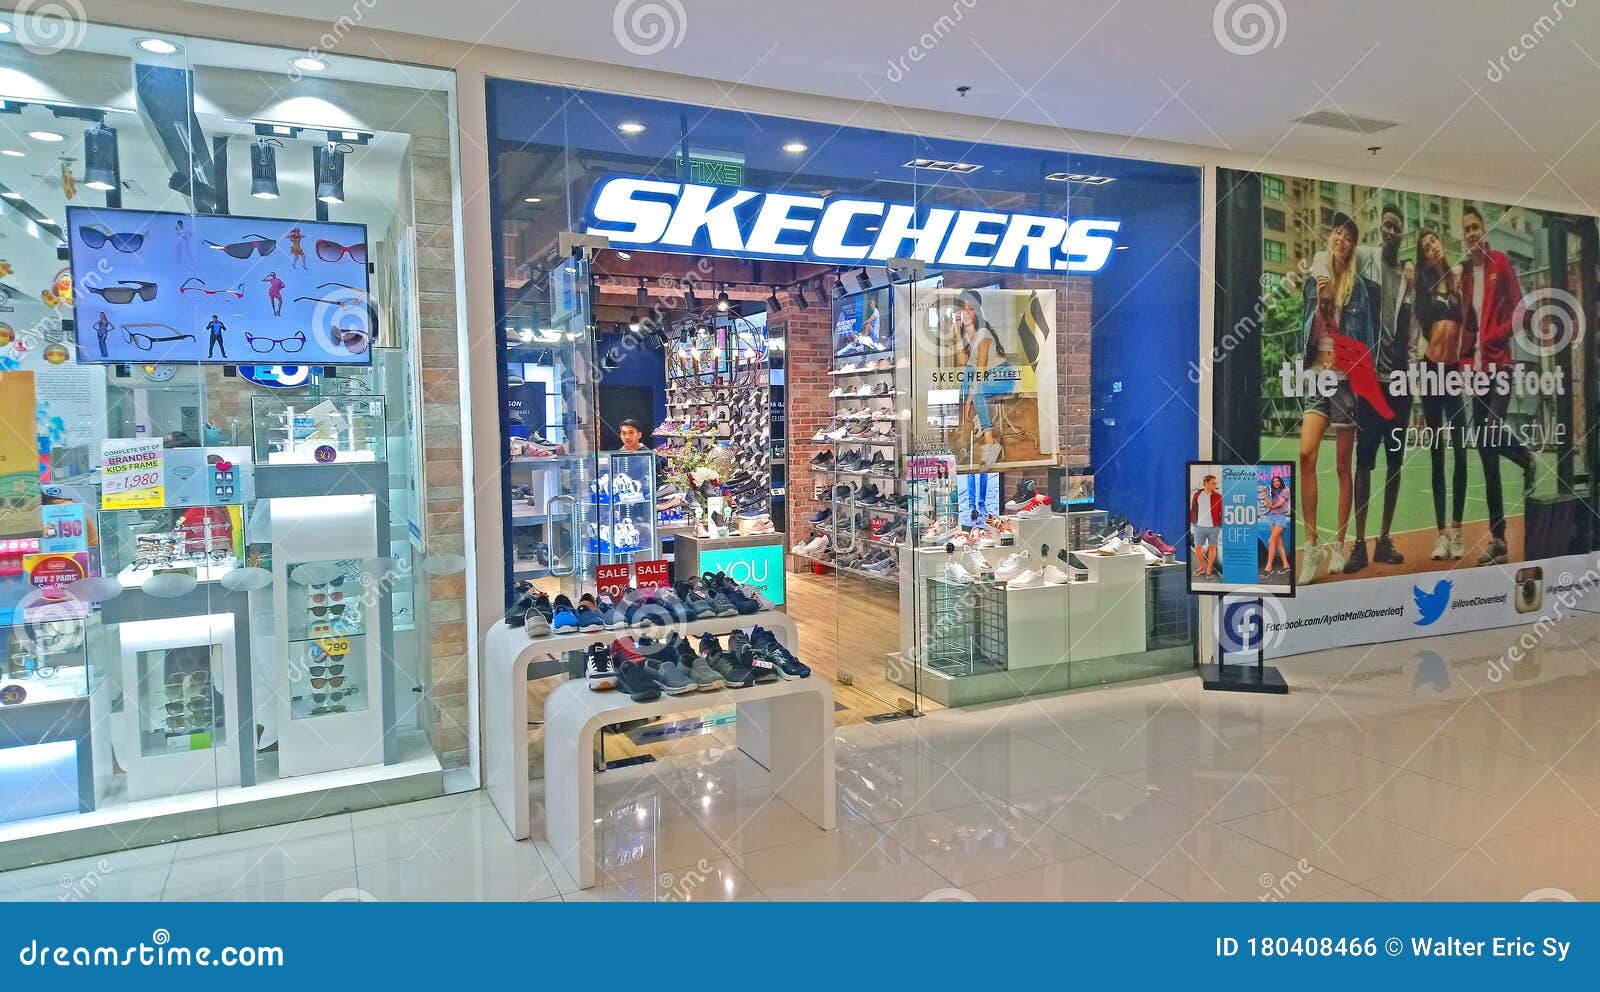 Hemmelighed over afkom Skechers Facade at Ayala Malls Cloverleaf in Quezon City, Philippines  Editorial Photo - Image of malls, skechers: 180408466